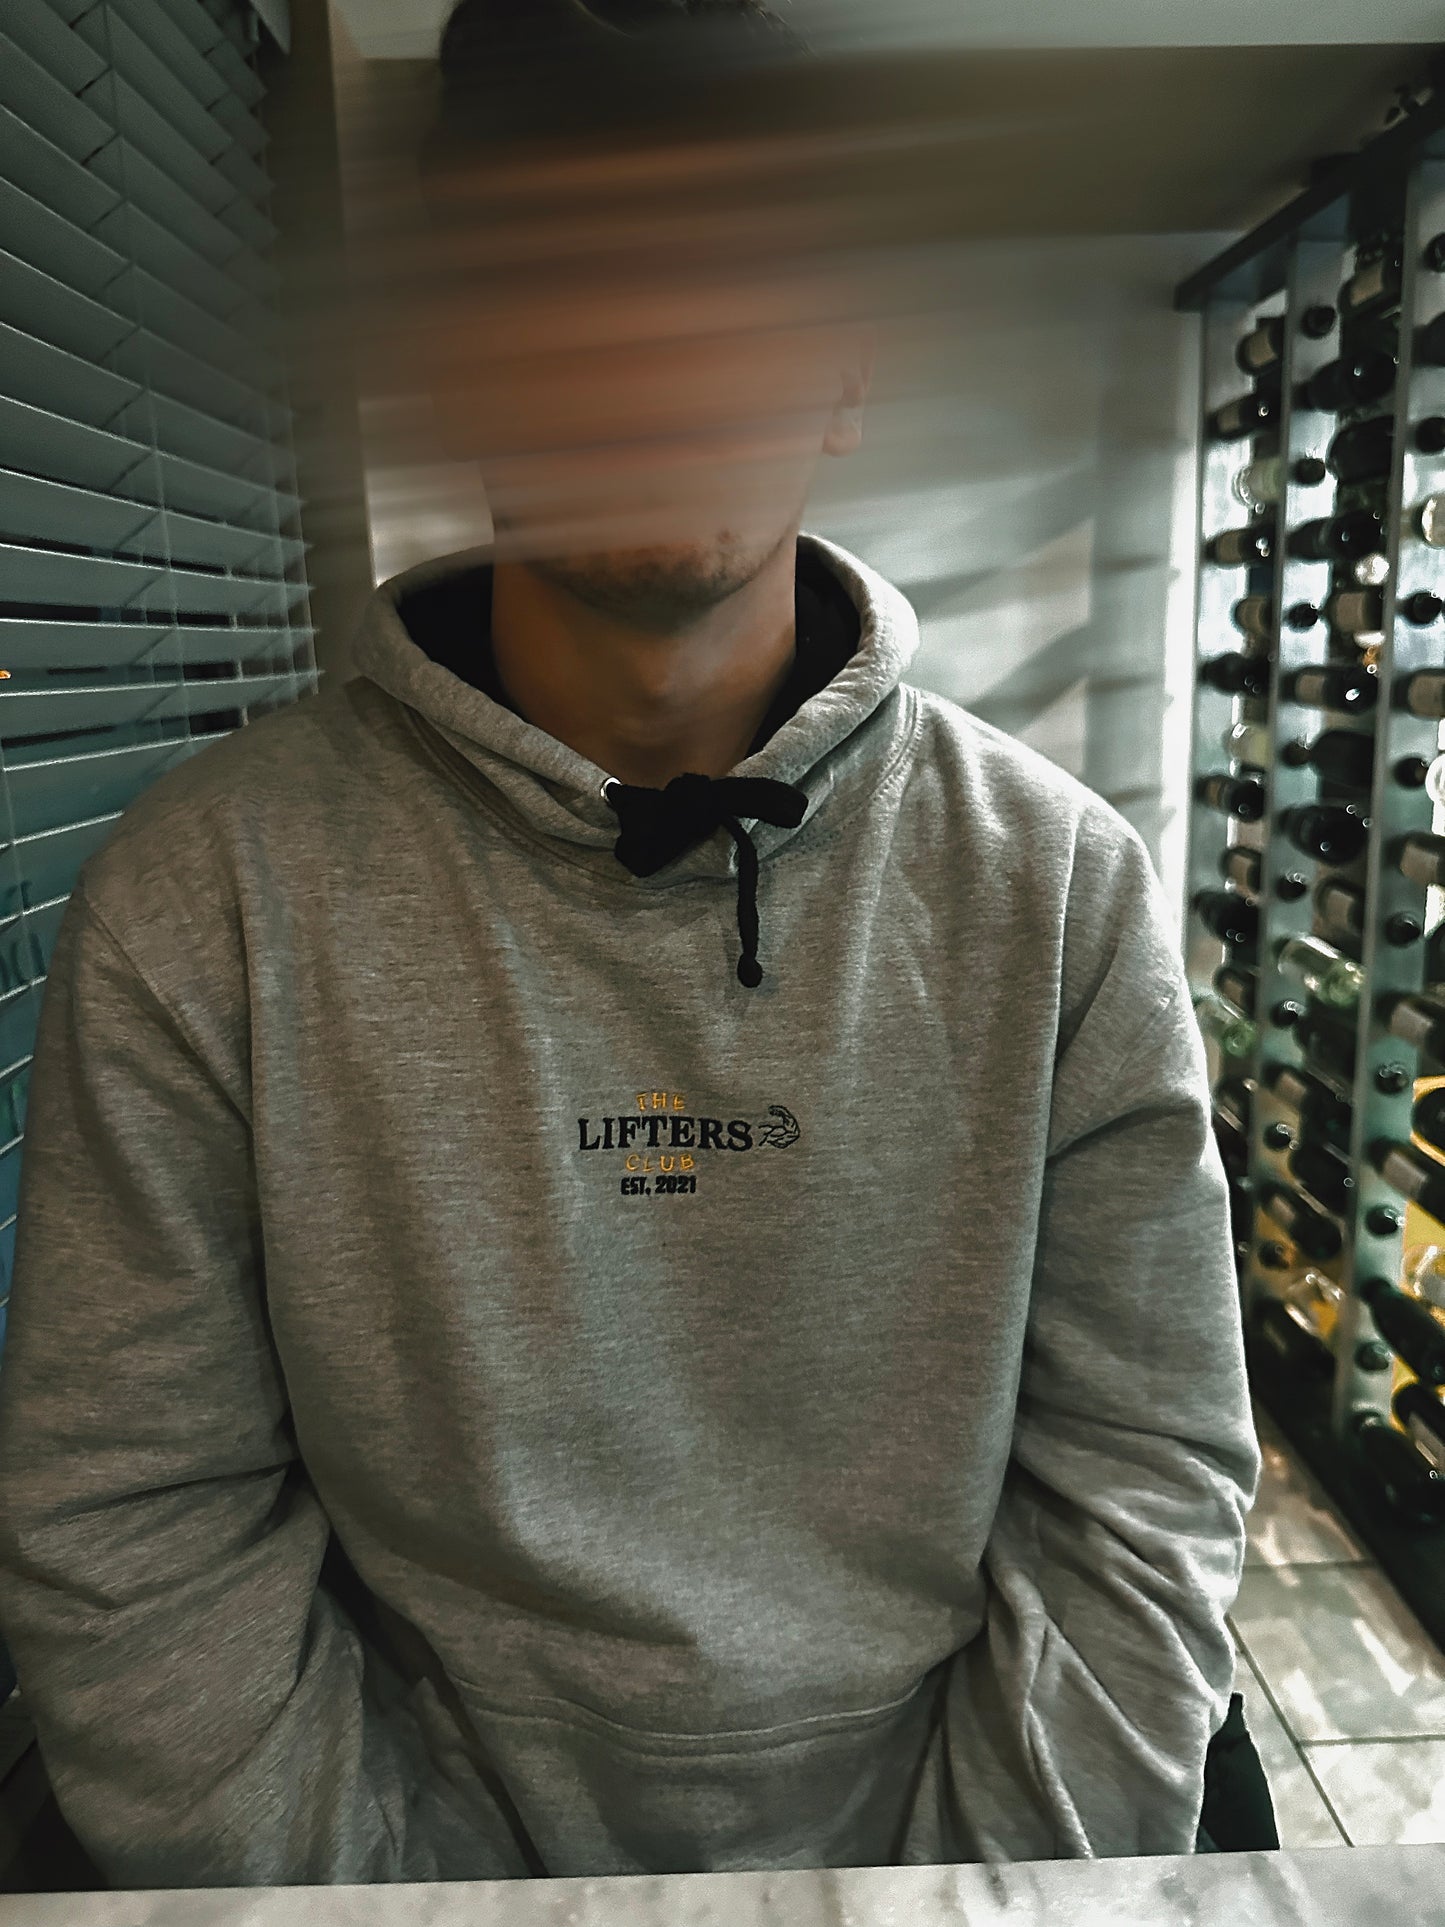 TheLifters hoodie limited edition